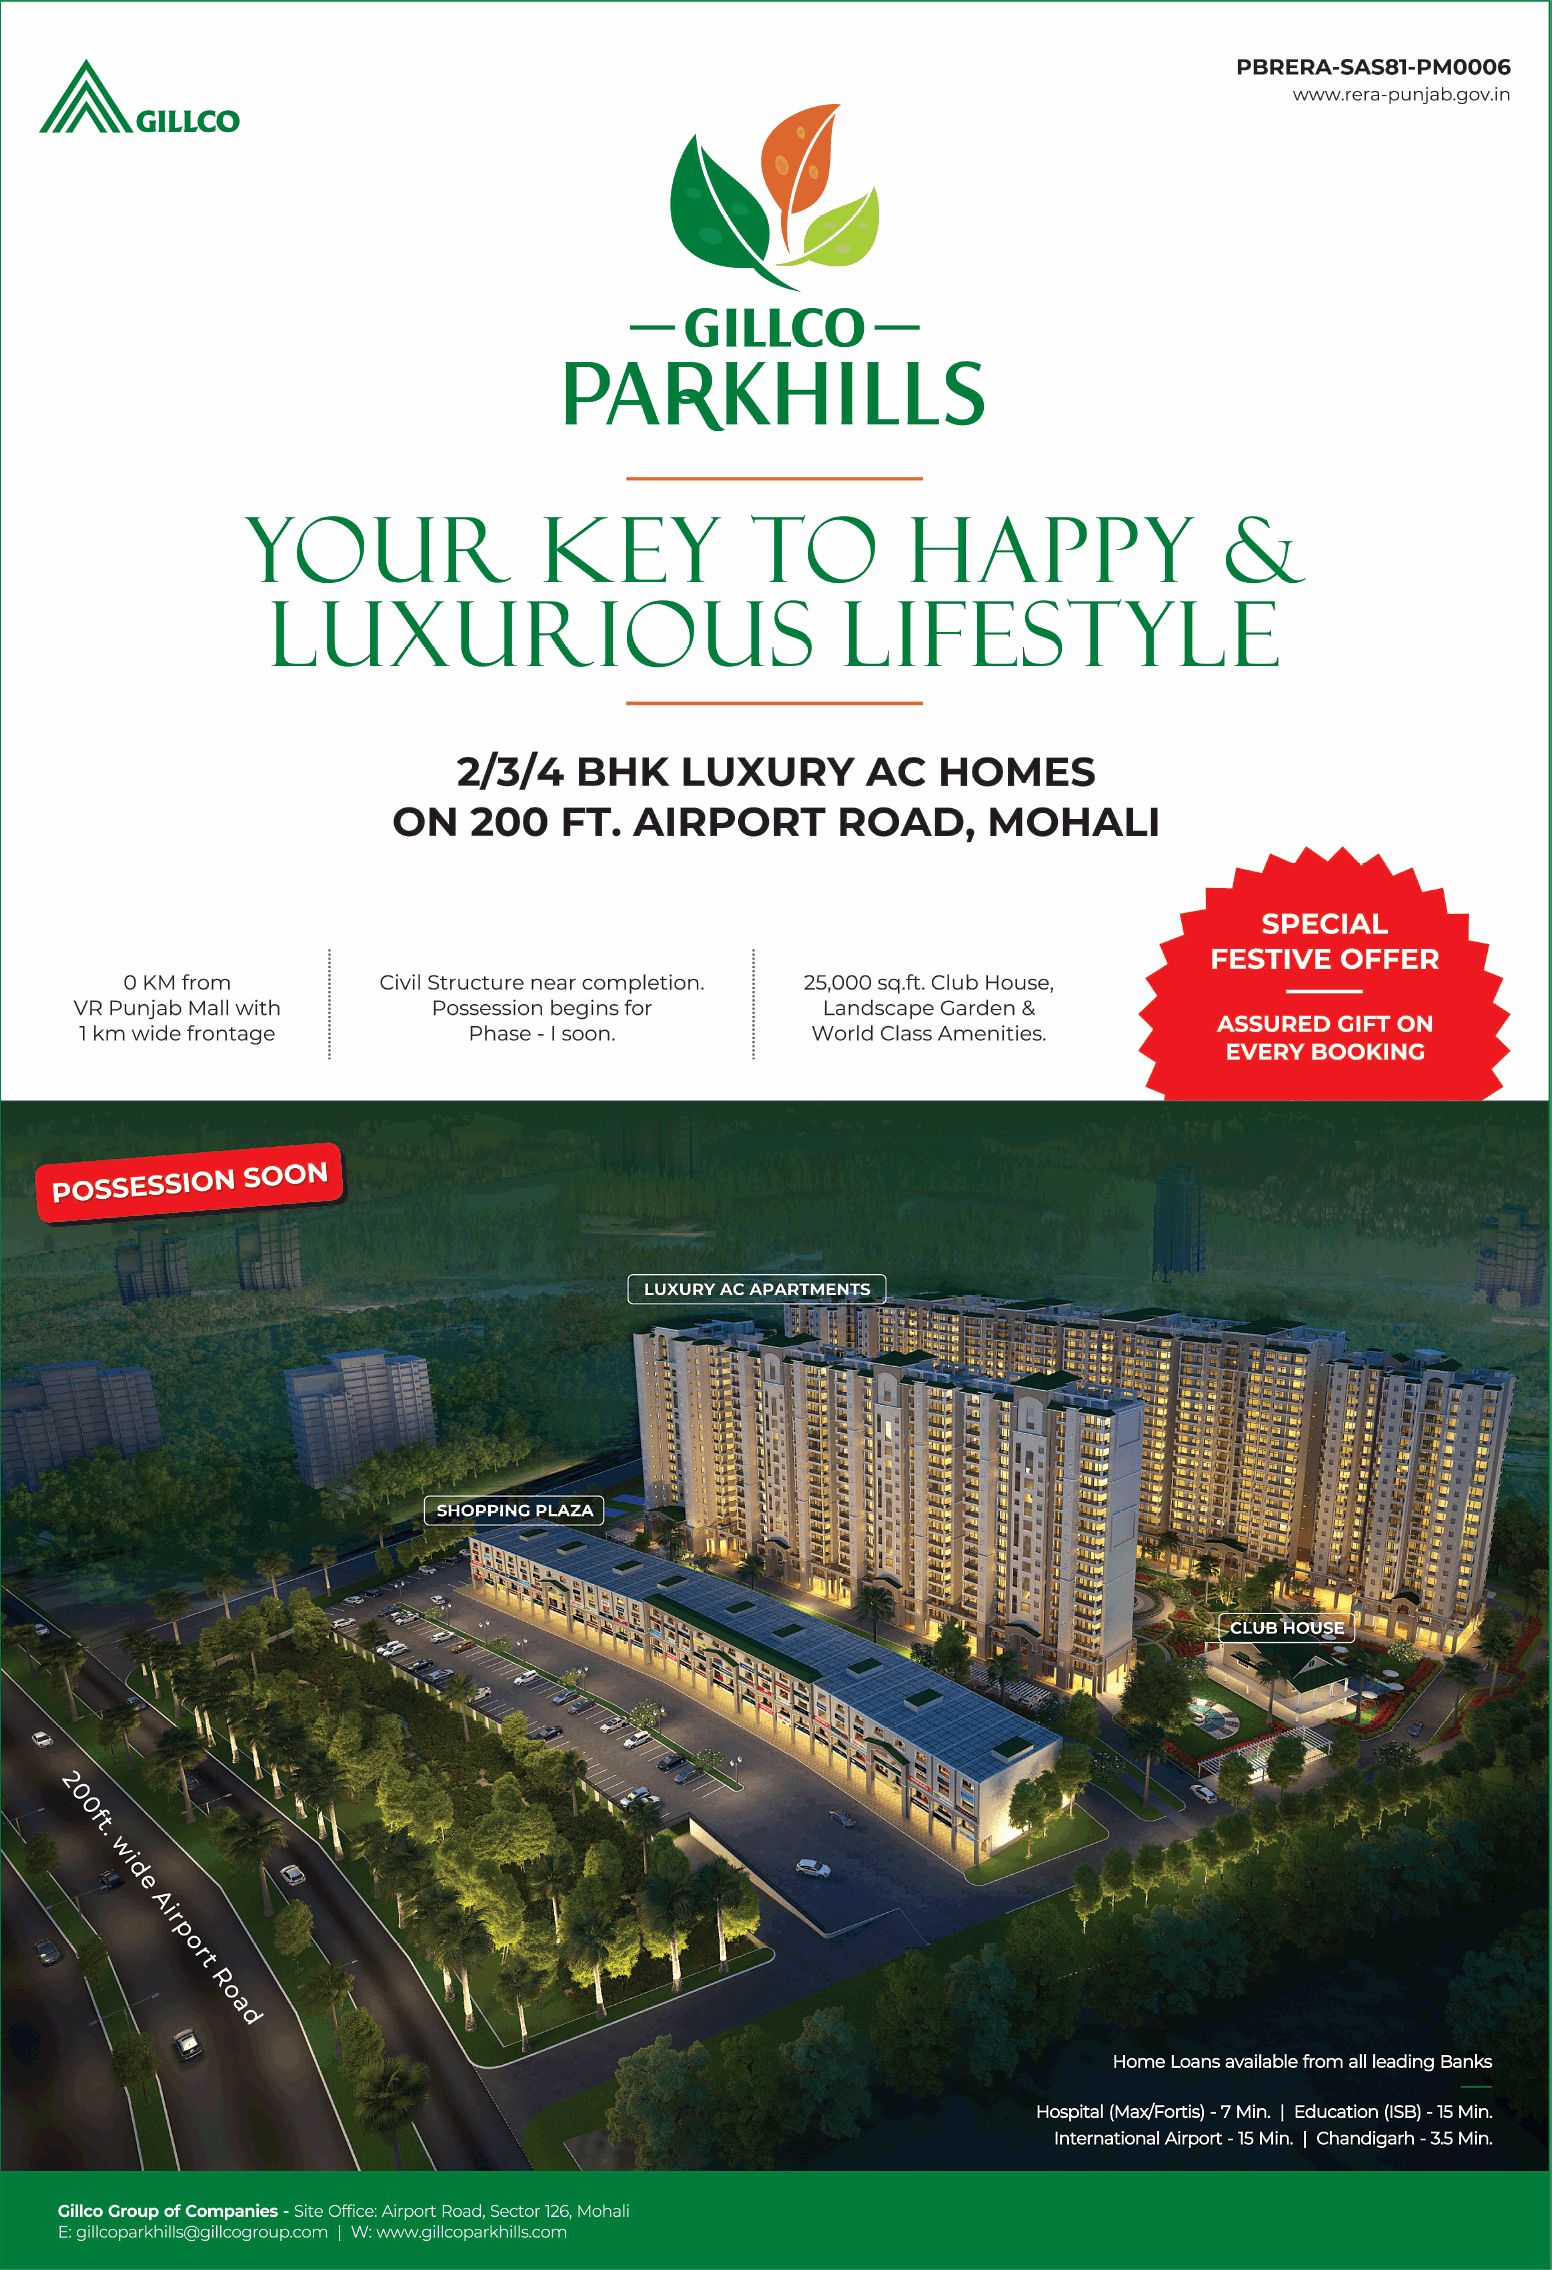 Special festive offer assured gift on every booking at Gillco Parkhills in Mohali